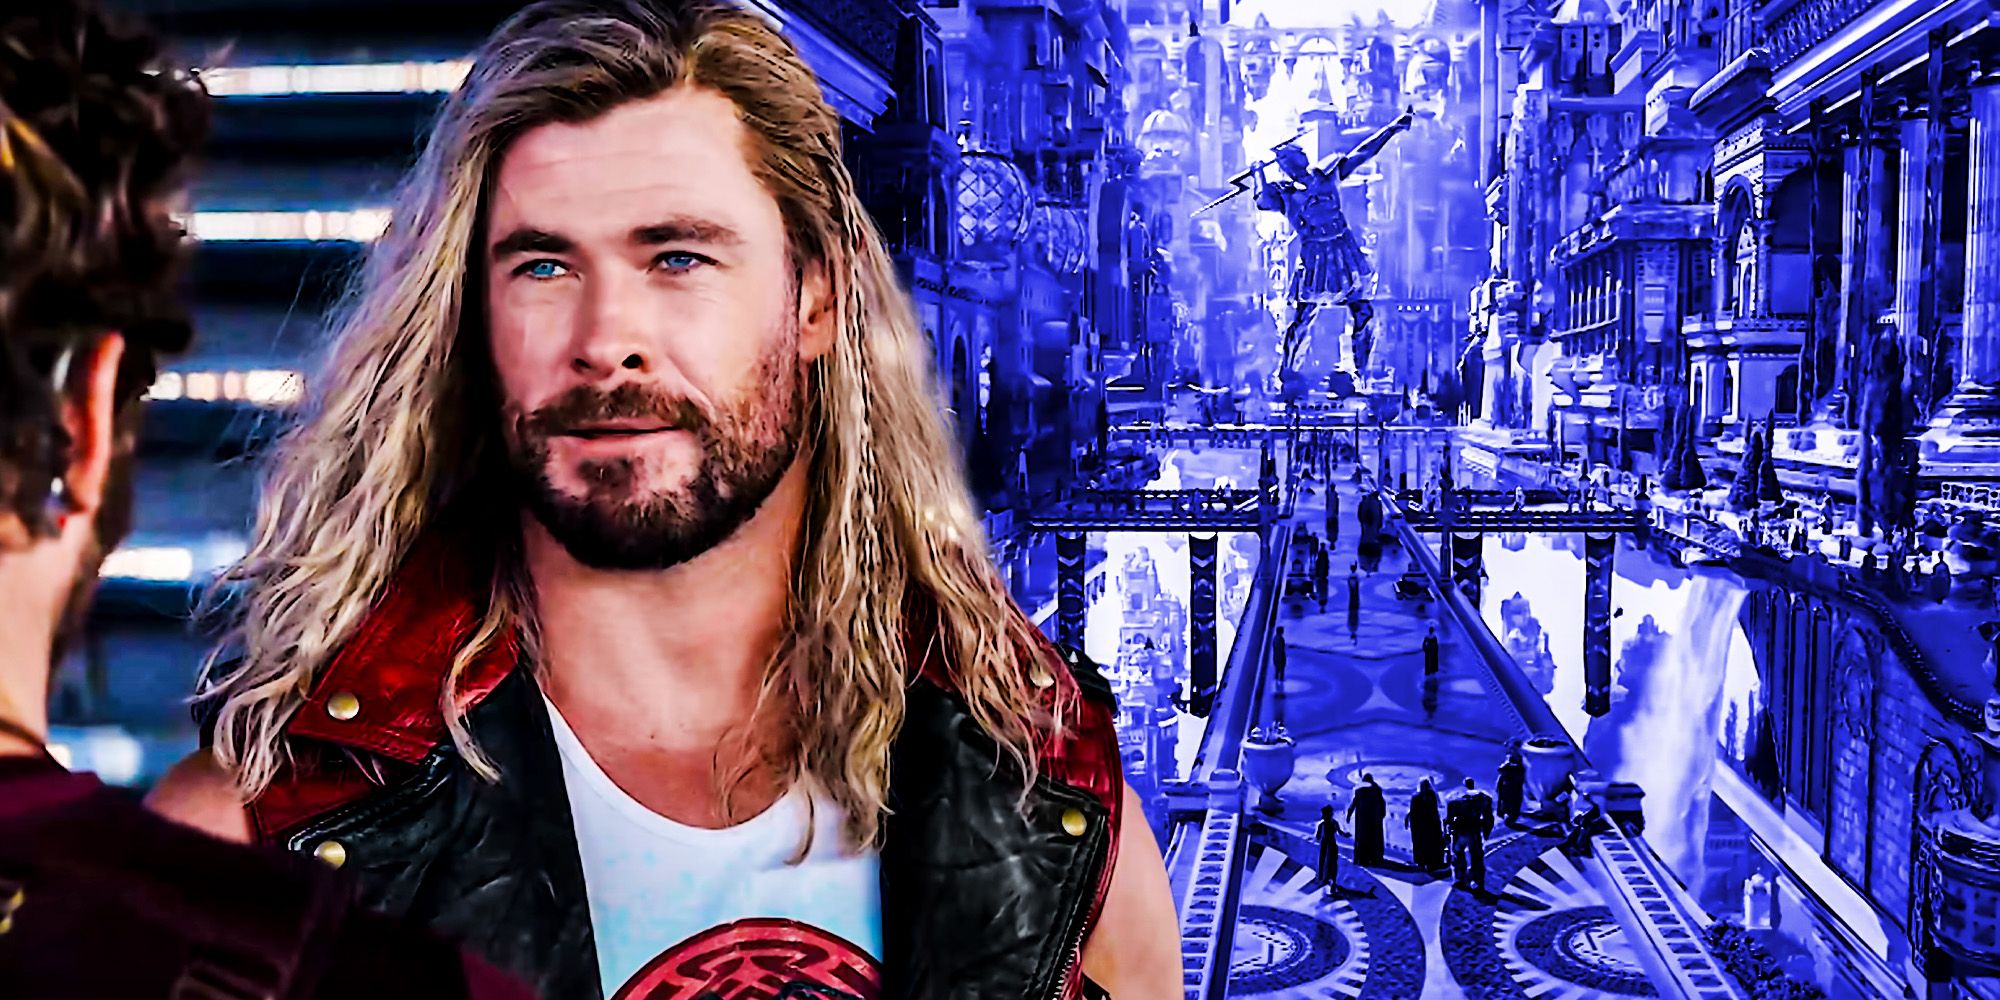 Love & Thunder Trailer May Reveal Thor & Jane’s Team-Up In Zeus’ Story